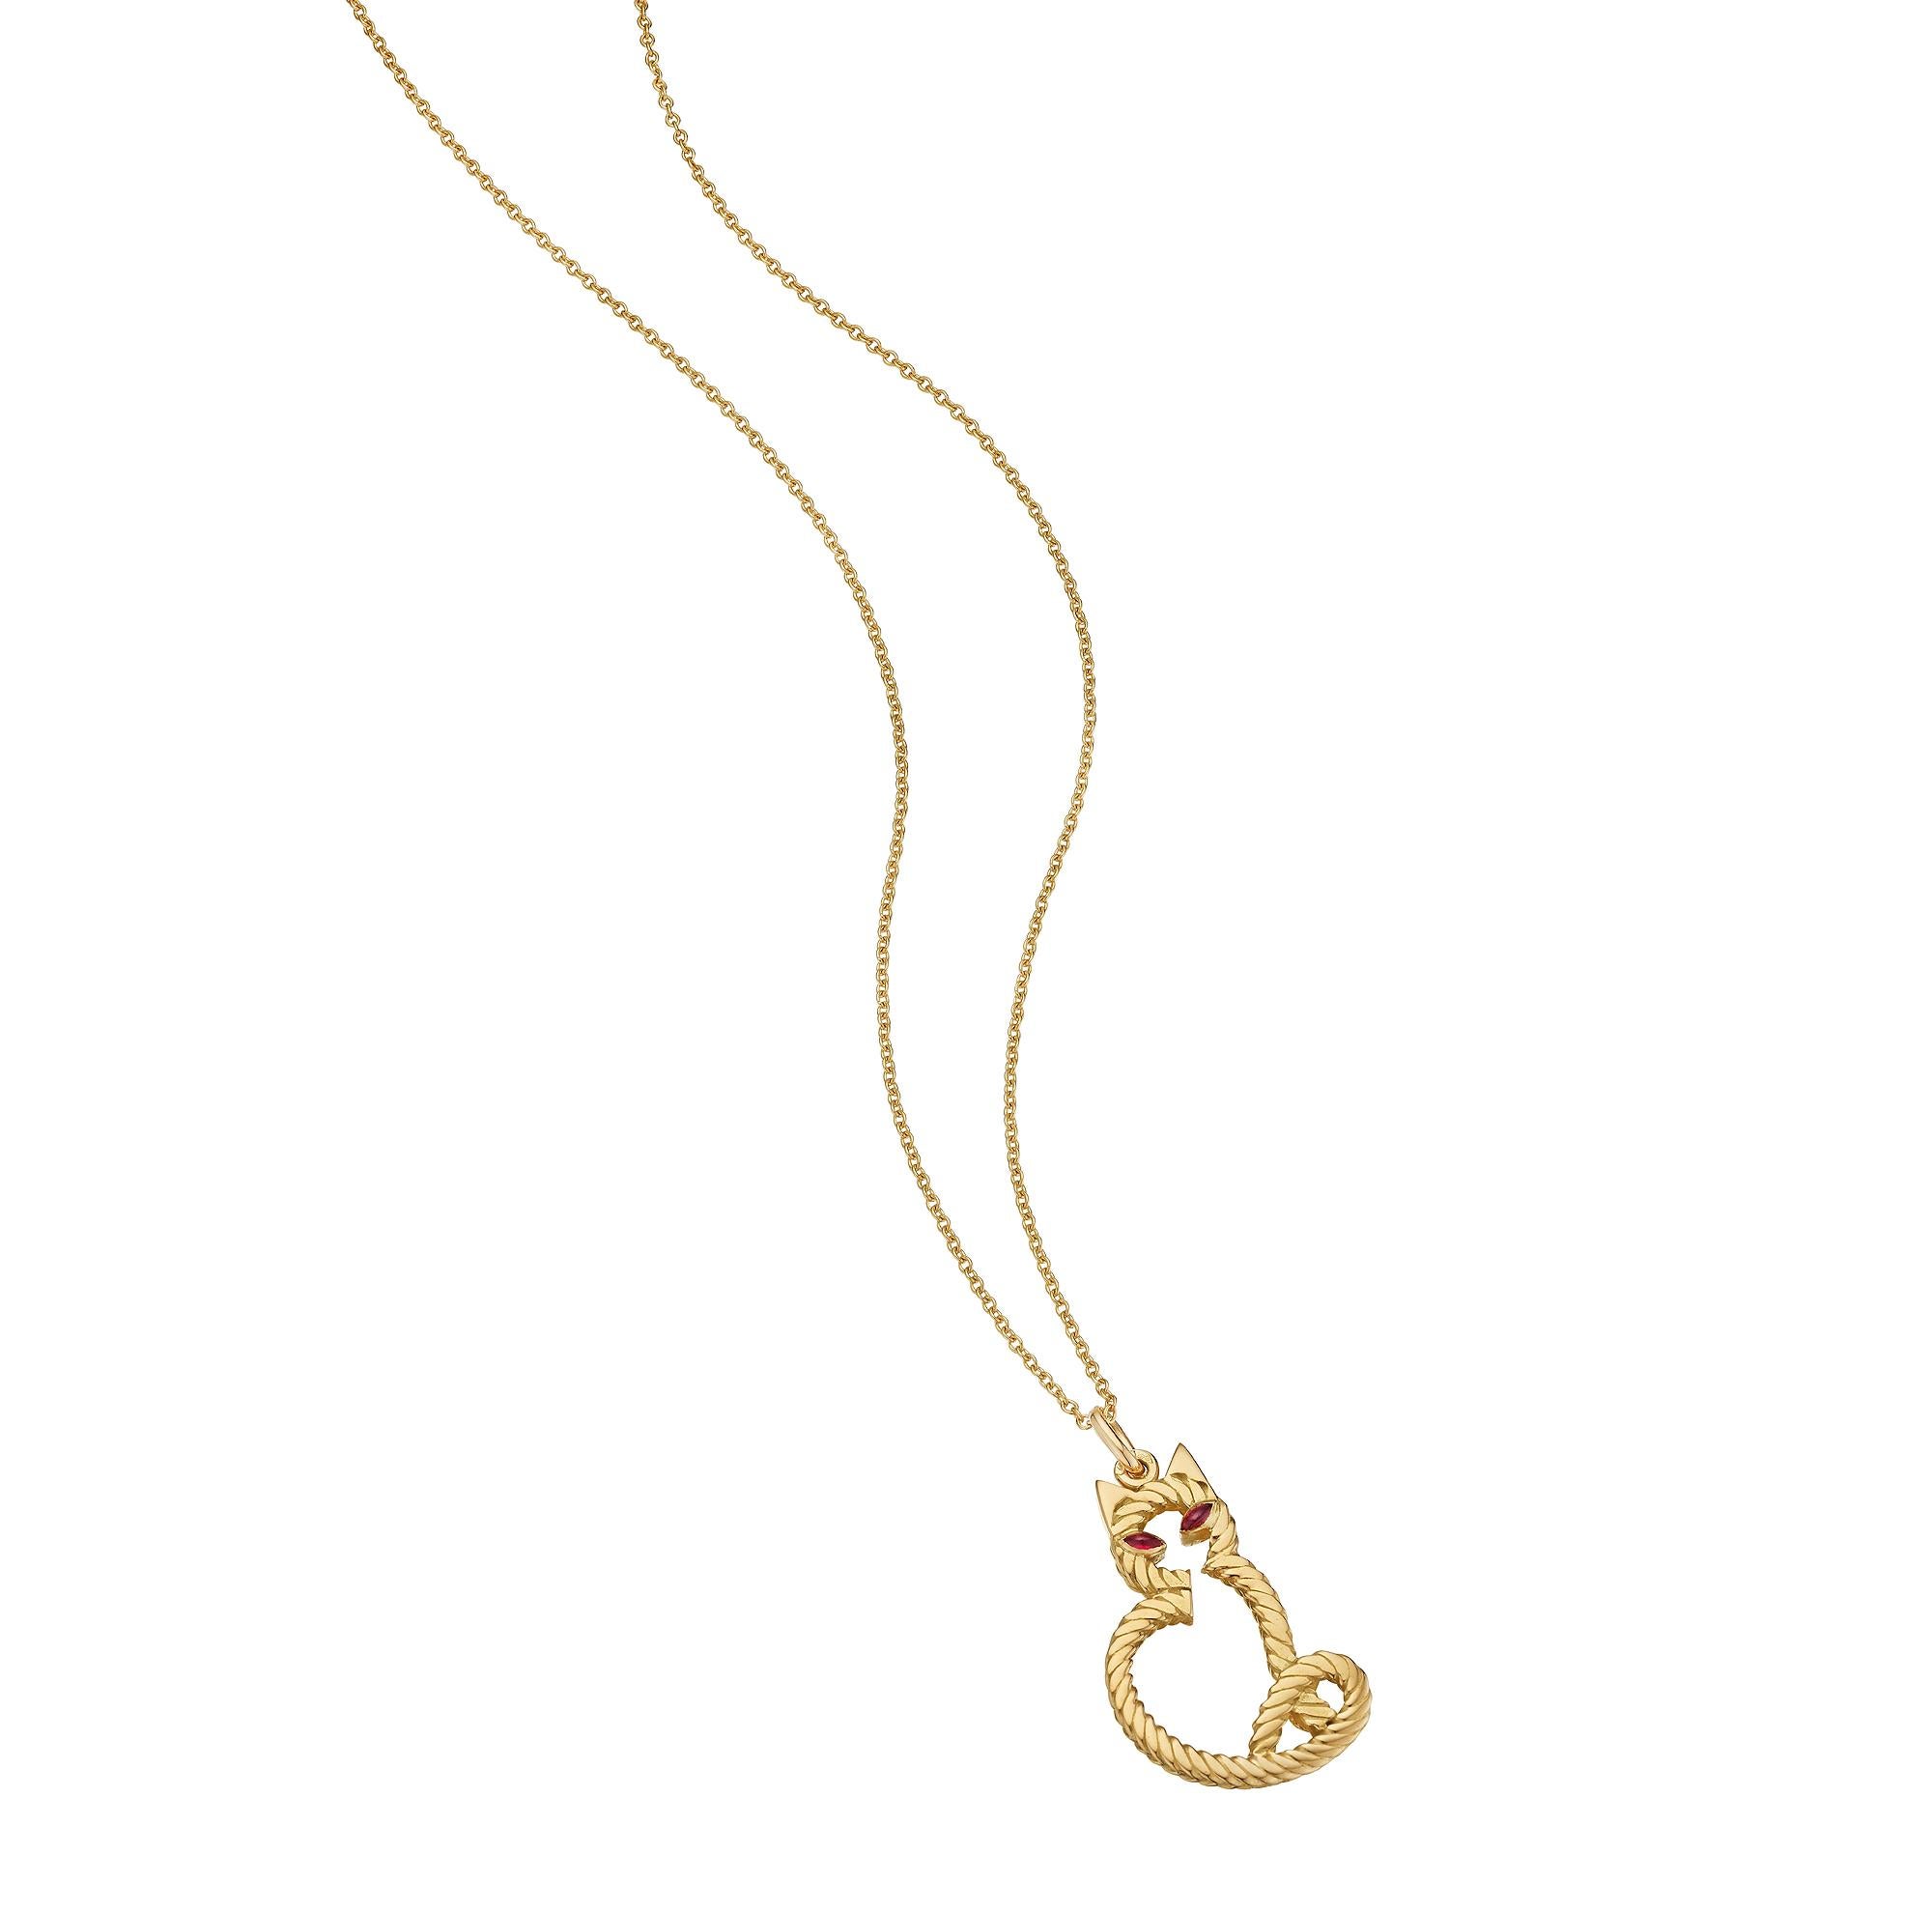 It is the cat's meow.  With ruby eyes and stylized feline fur, this Georges L'Enfant Van Cleef & Arpels vintage 18 karat yellow gold silhouette of a cat will keep you meowing 24/7.  Signed VCA with Georges L'Enfant hallmarks.  Circa 1970-75. 